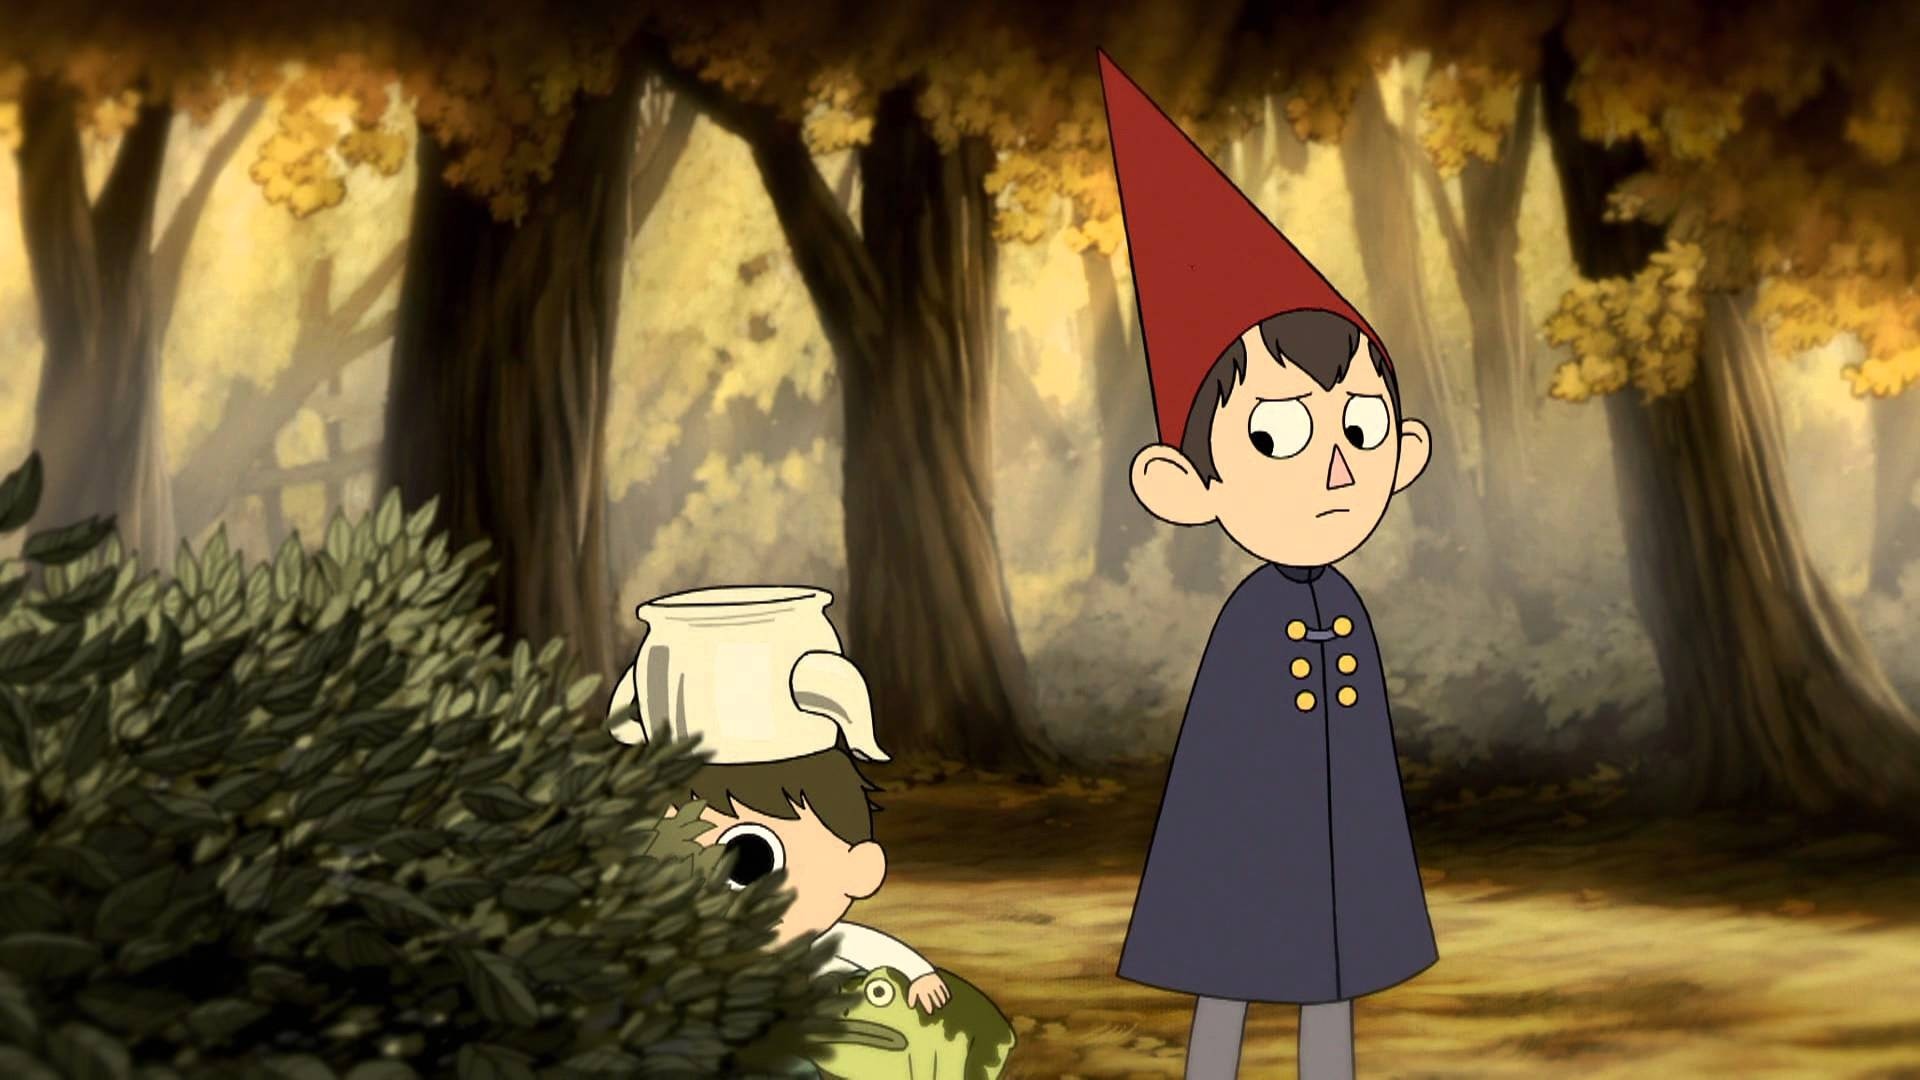 1920x1080 Over the Garden Wall Wallpaper, Wirt and Greg